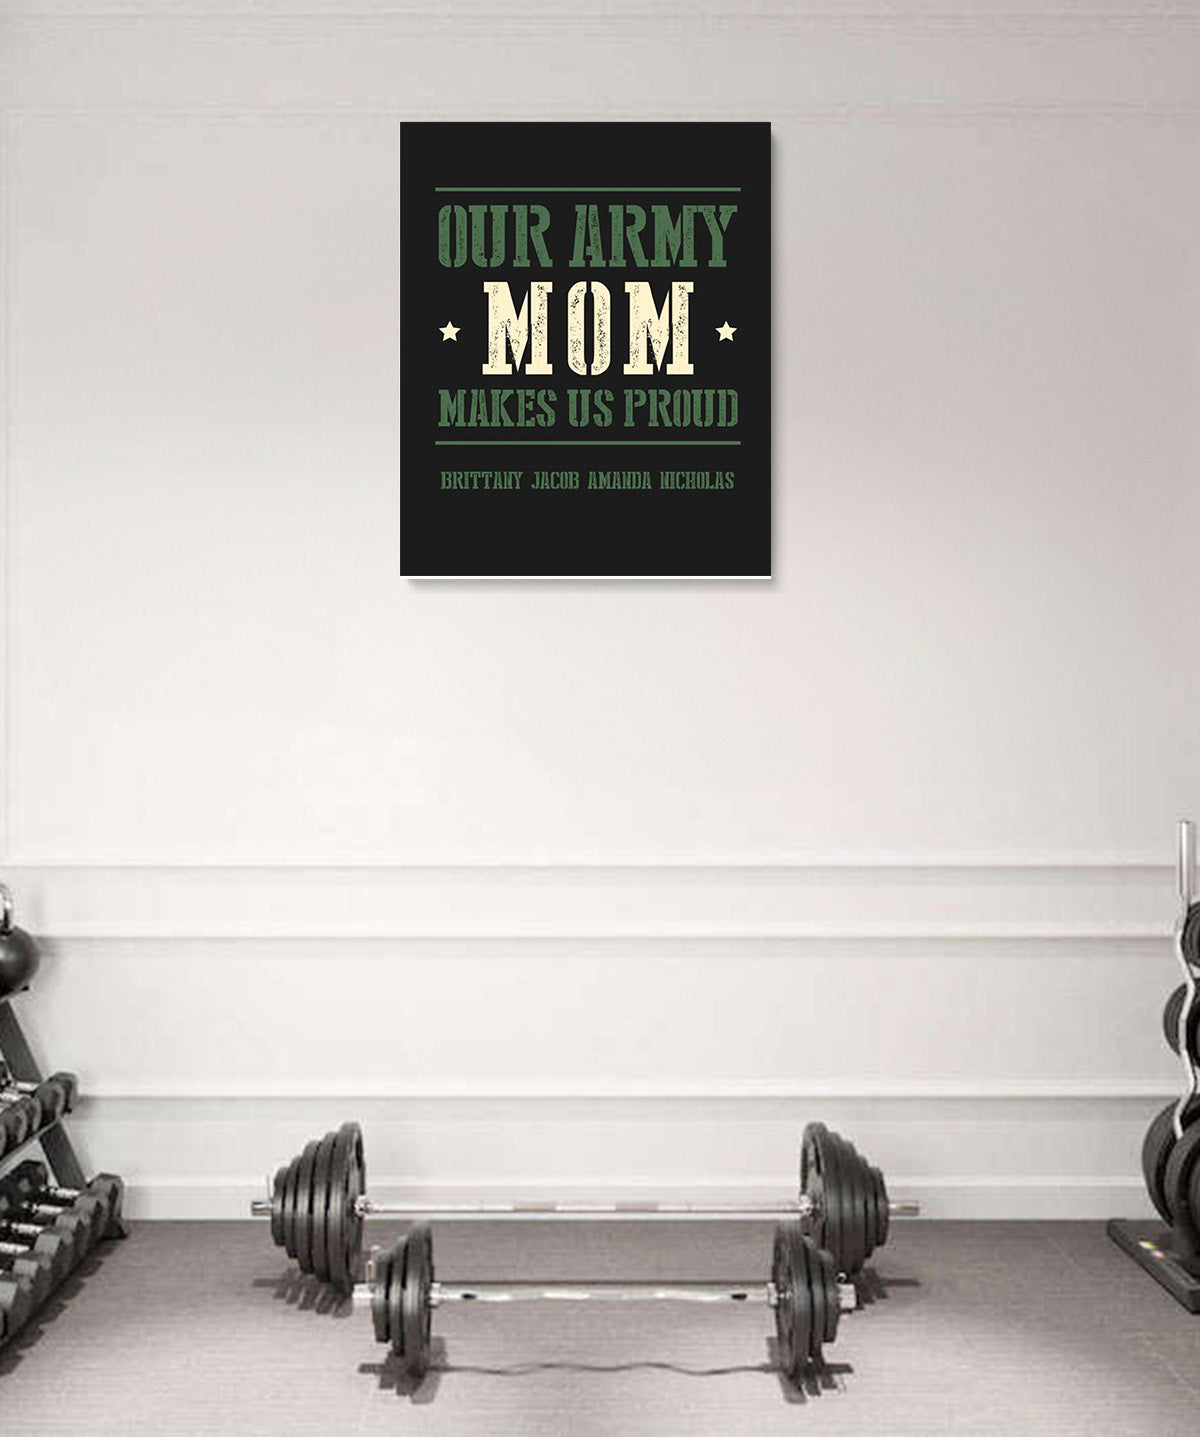 Our Army Mom Makes Us Proud - Customizable Wall Décor Canvas Art - Gift for Mom From Children